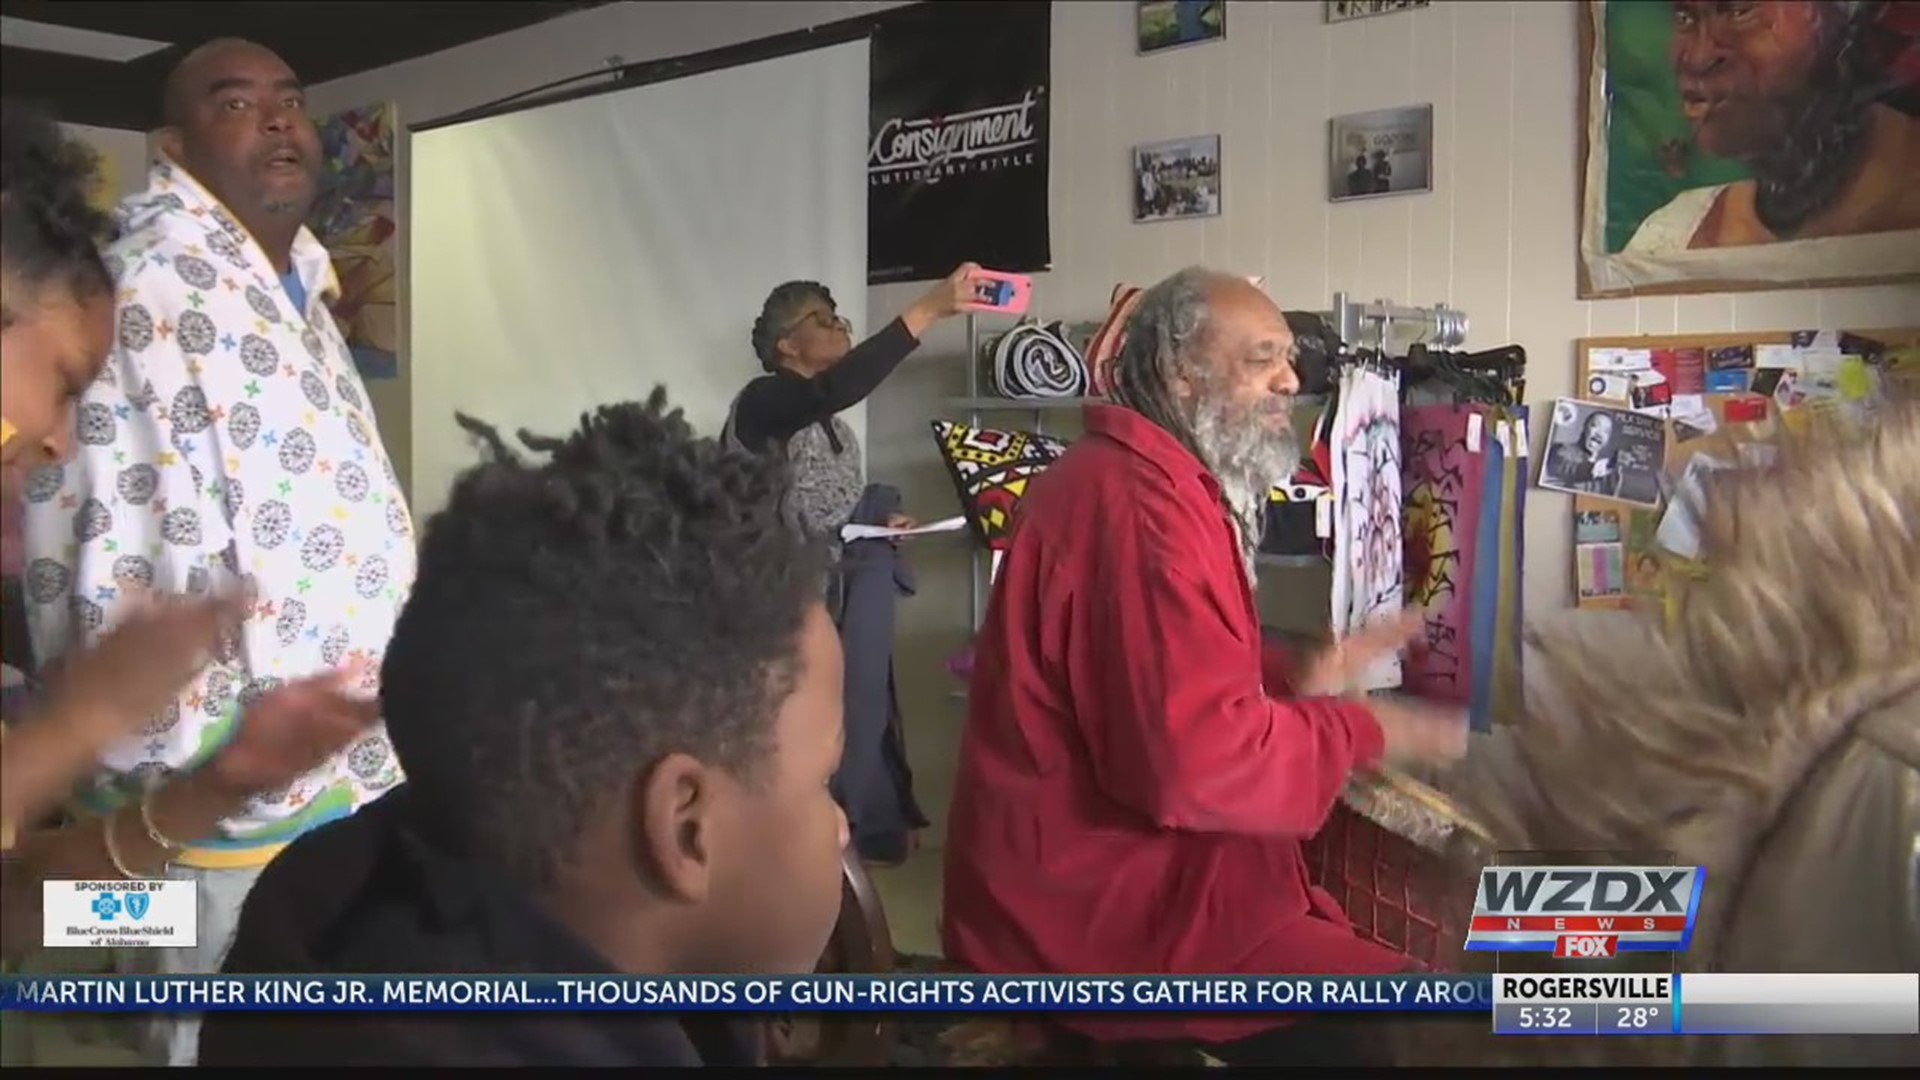 Folks here in Huntsville are keeping Dr. Martin Luther King Jr.'s legacy alive by giving back to their communities.